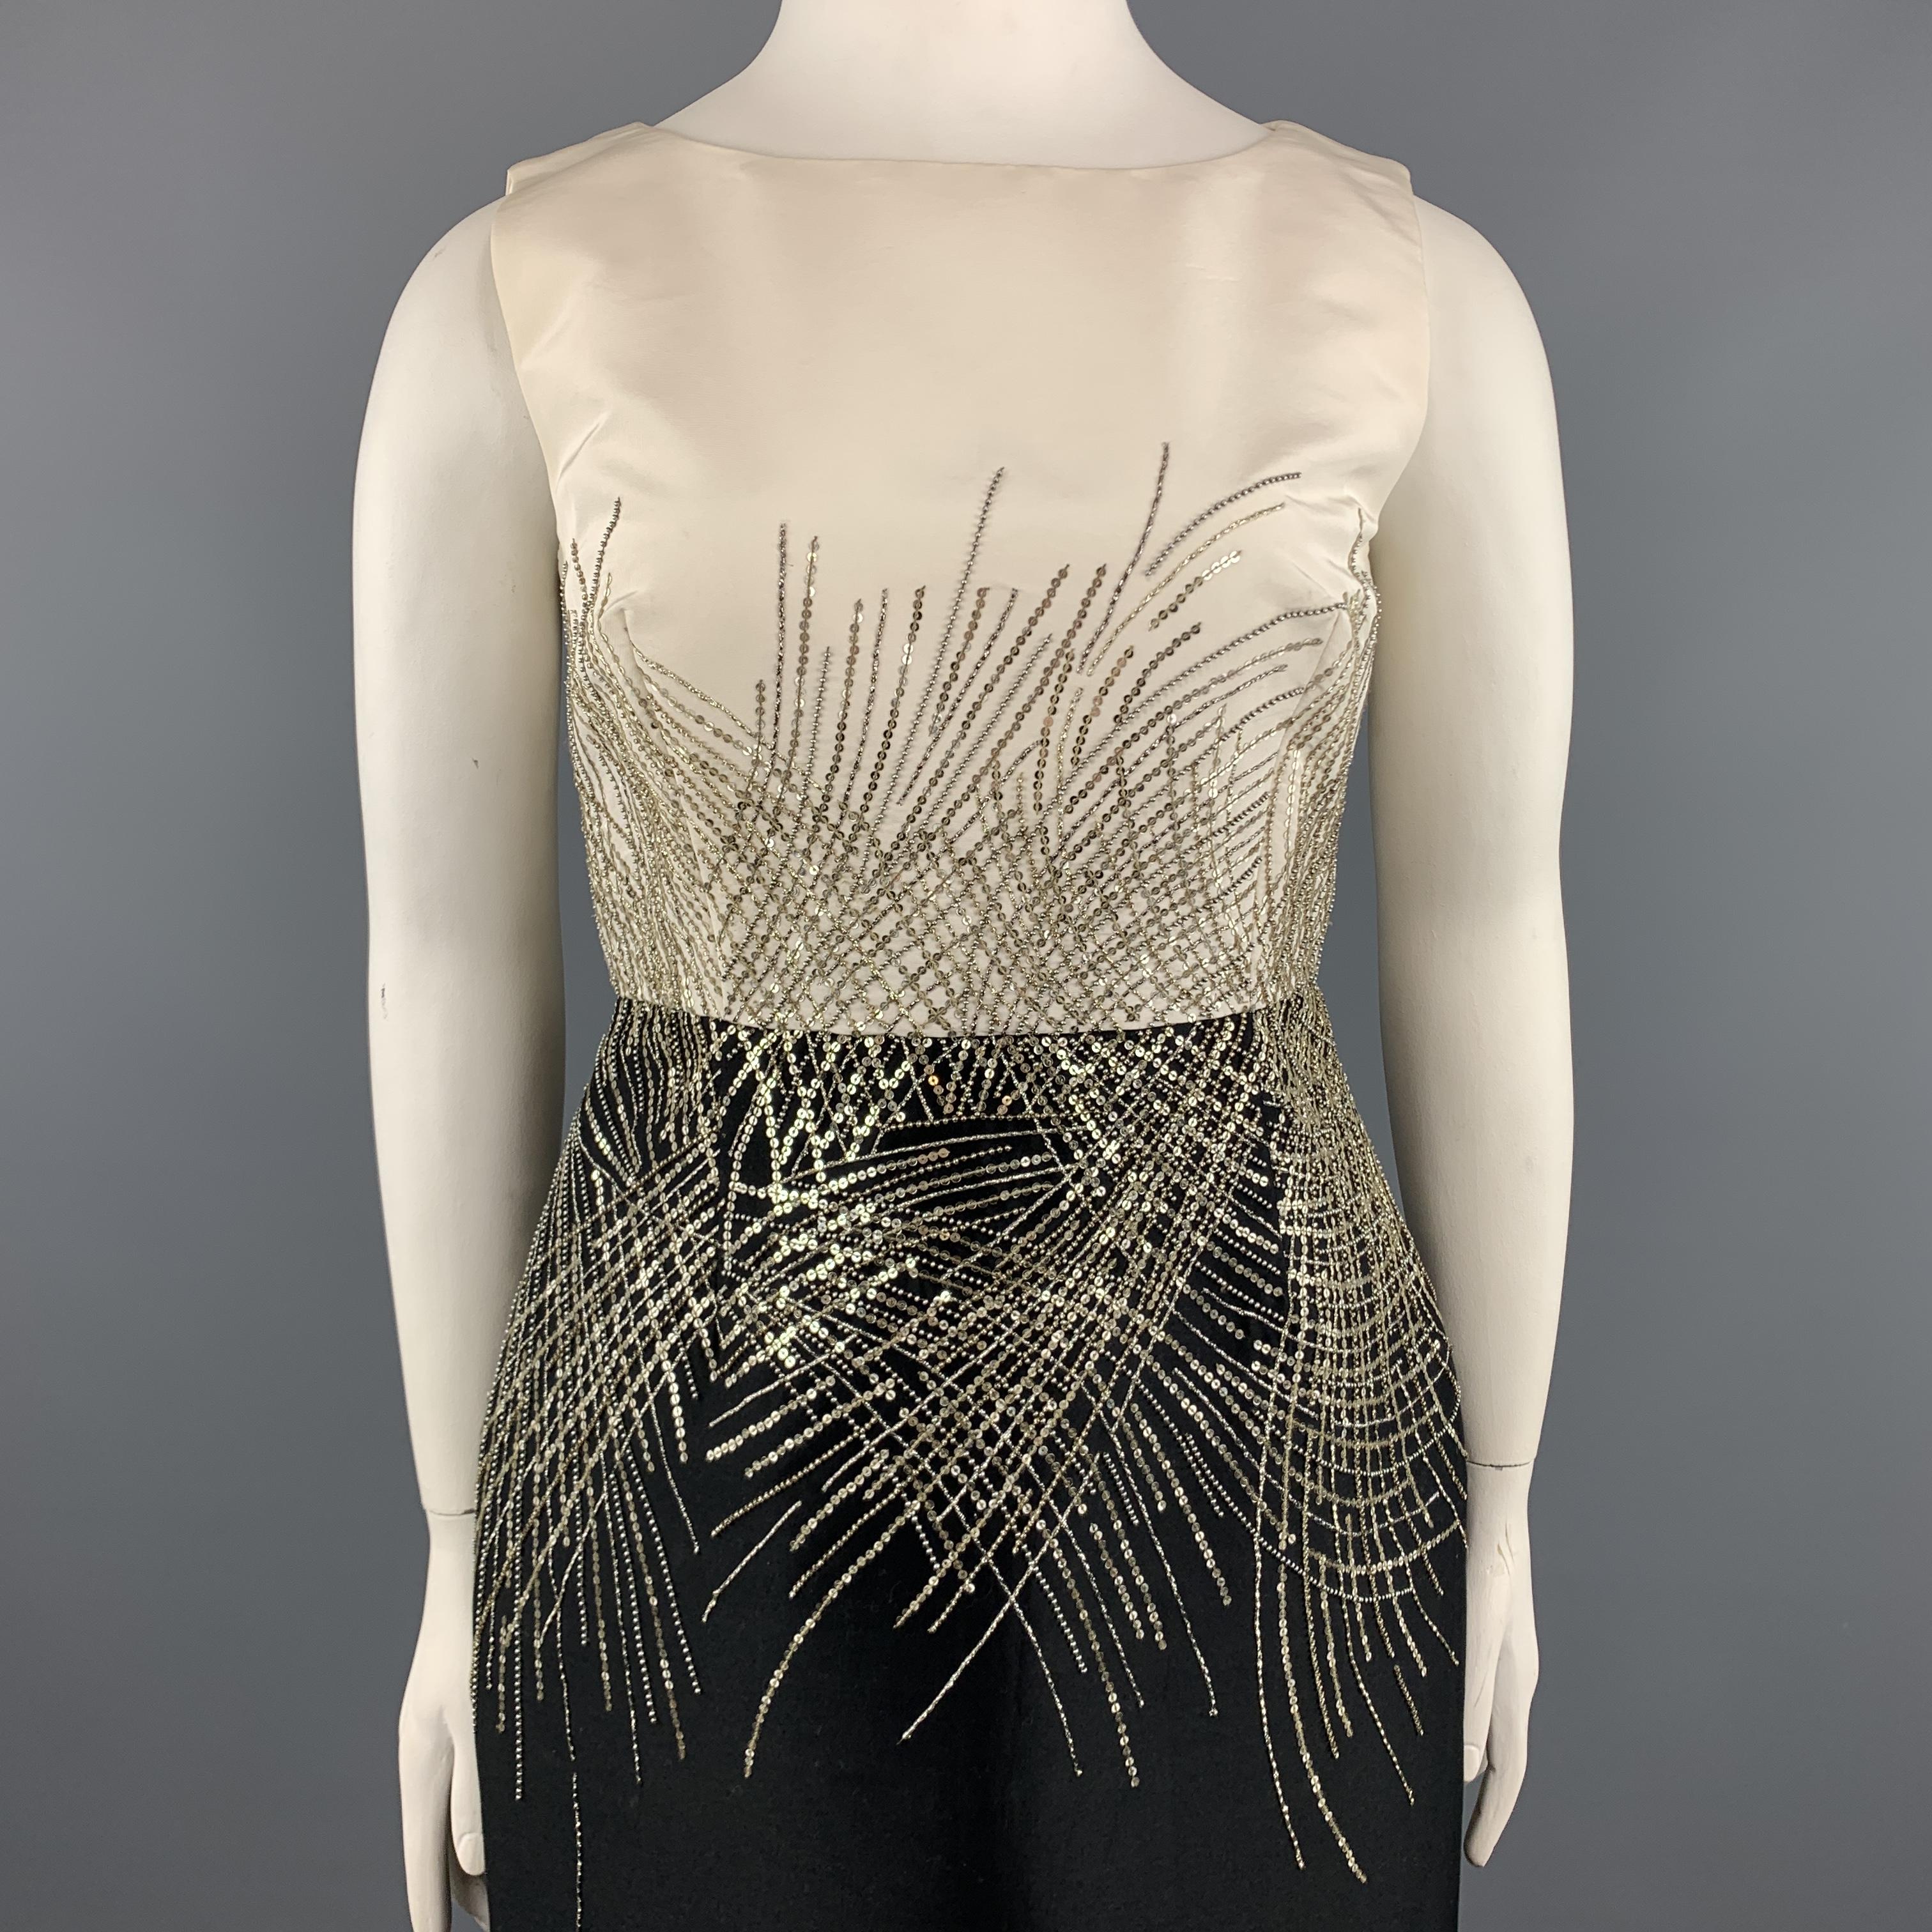 CAROLINA HERRERA sleeveless cocktail dress comes in silk taffeta with a cream boat neck shell top, black pencil skirt bottom, and metallic sequin beadwork pattern through the mid section. Made in USA.

Excellent Pre-Owned Condition.
Marked: